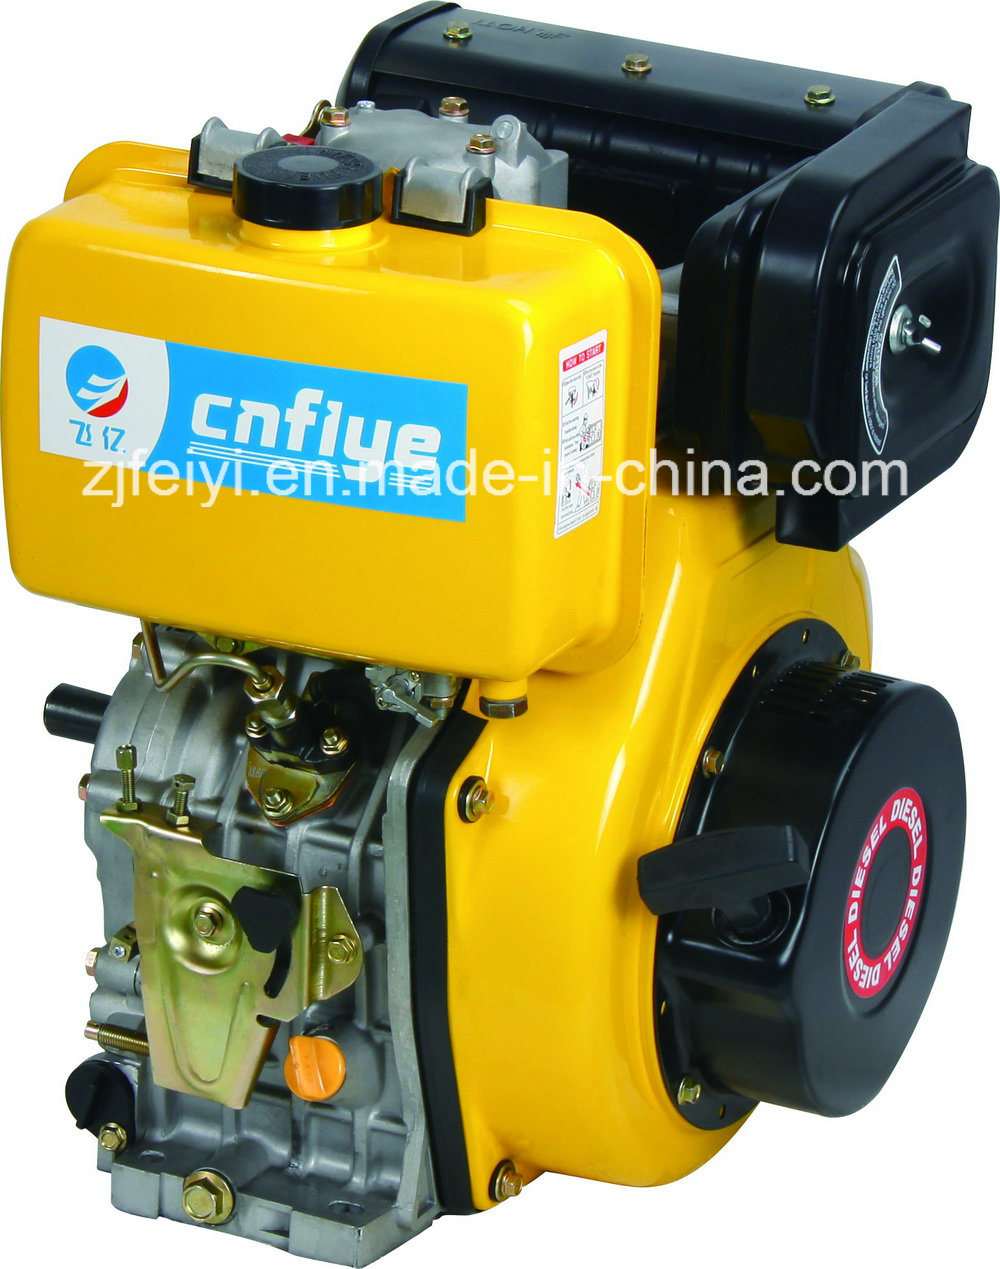 186fy-A0025 Air Cooling Portable Diesel Engine